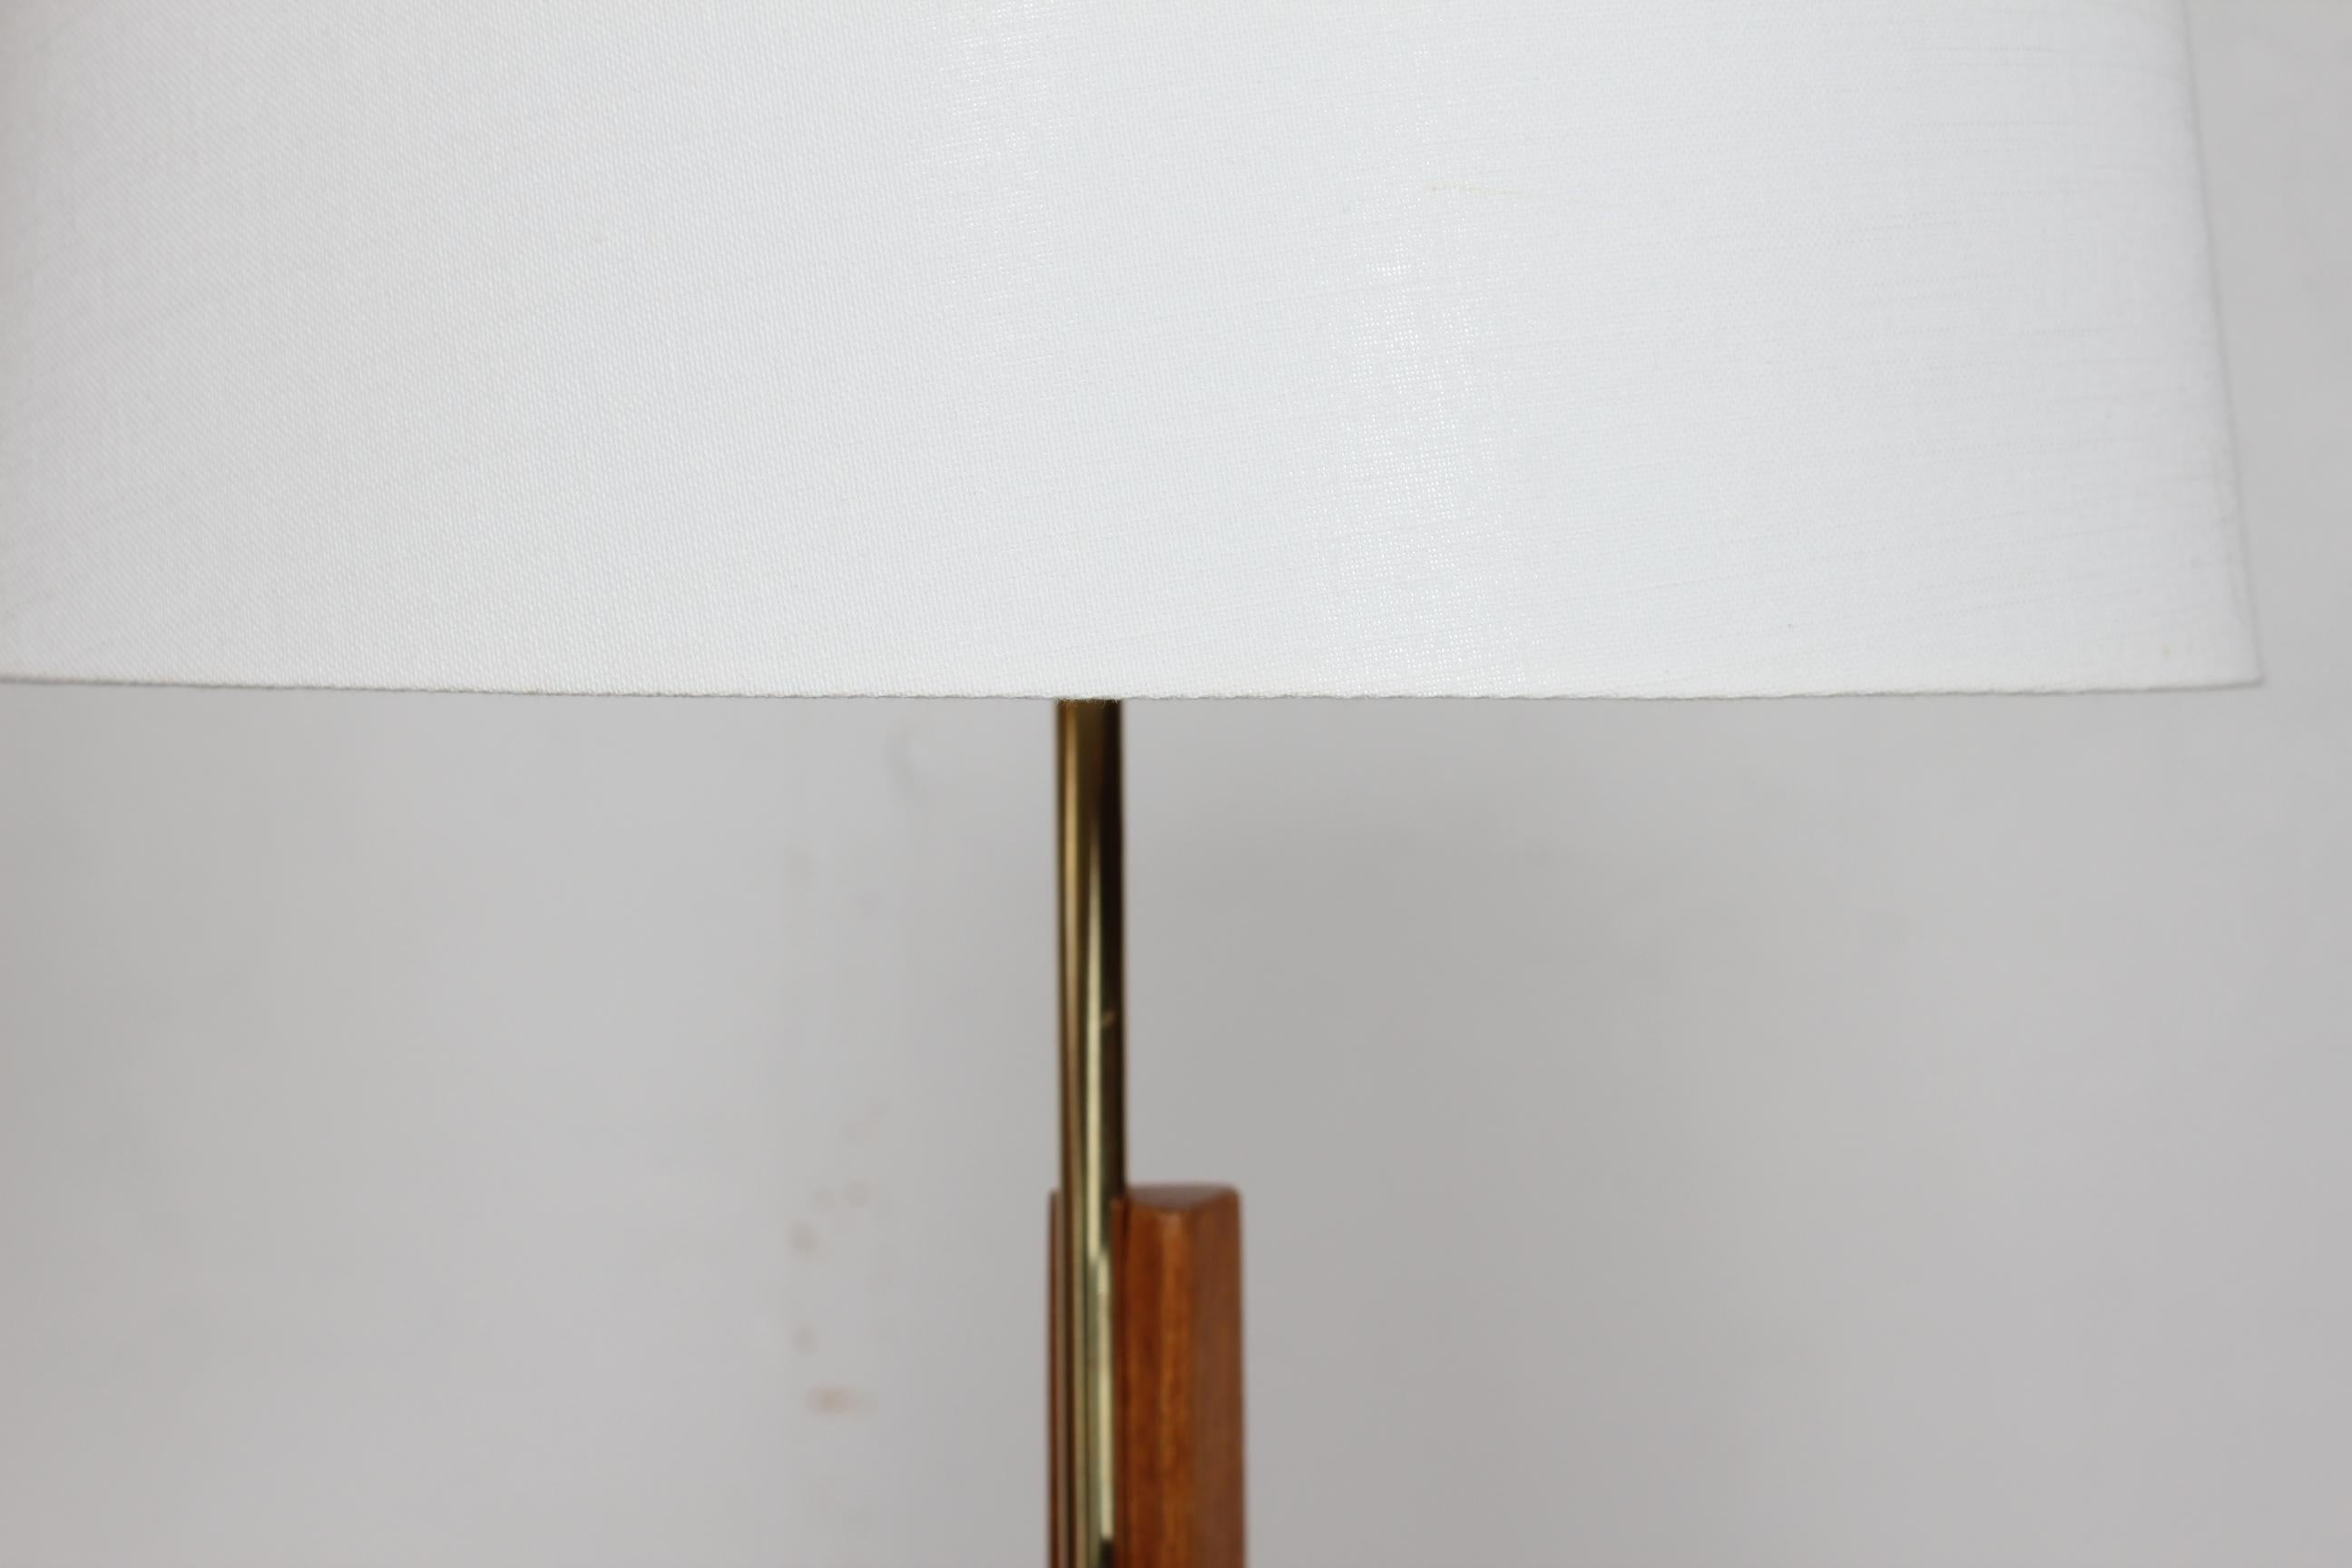 Height adjustable floor lamp by Danish designer Svend Aage Holm Sørensen (1913-2004) made at his own workshop Holm Sørensen & Co.

The lamp base is made of cast iron, the stem is made of oak and brass.

Included is a new lamp shade designed and made